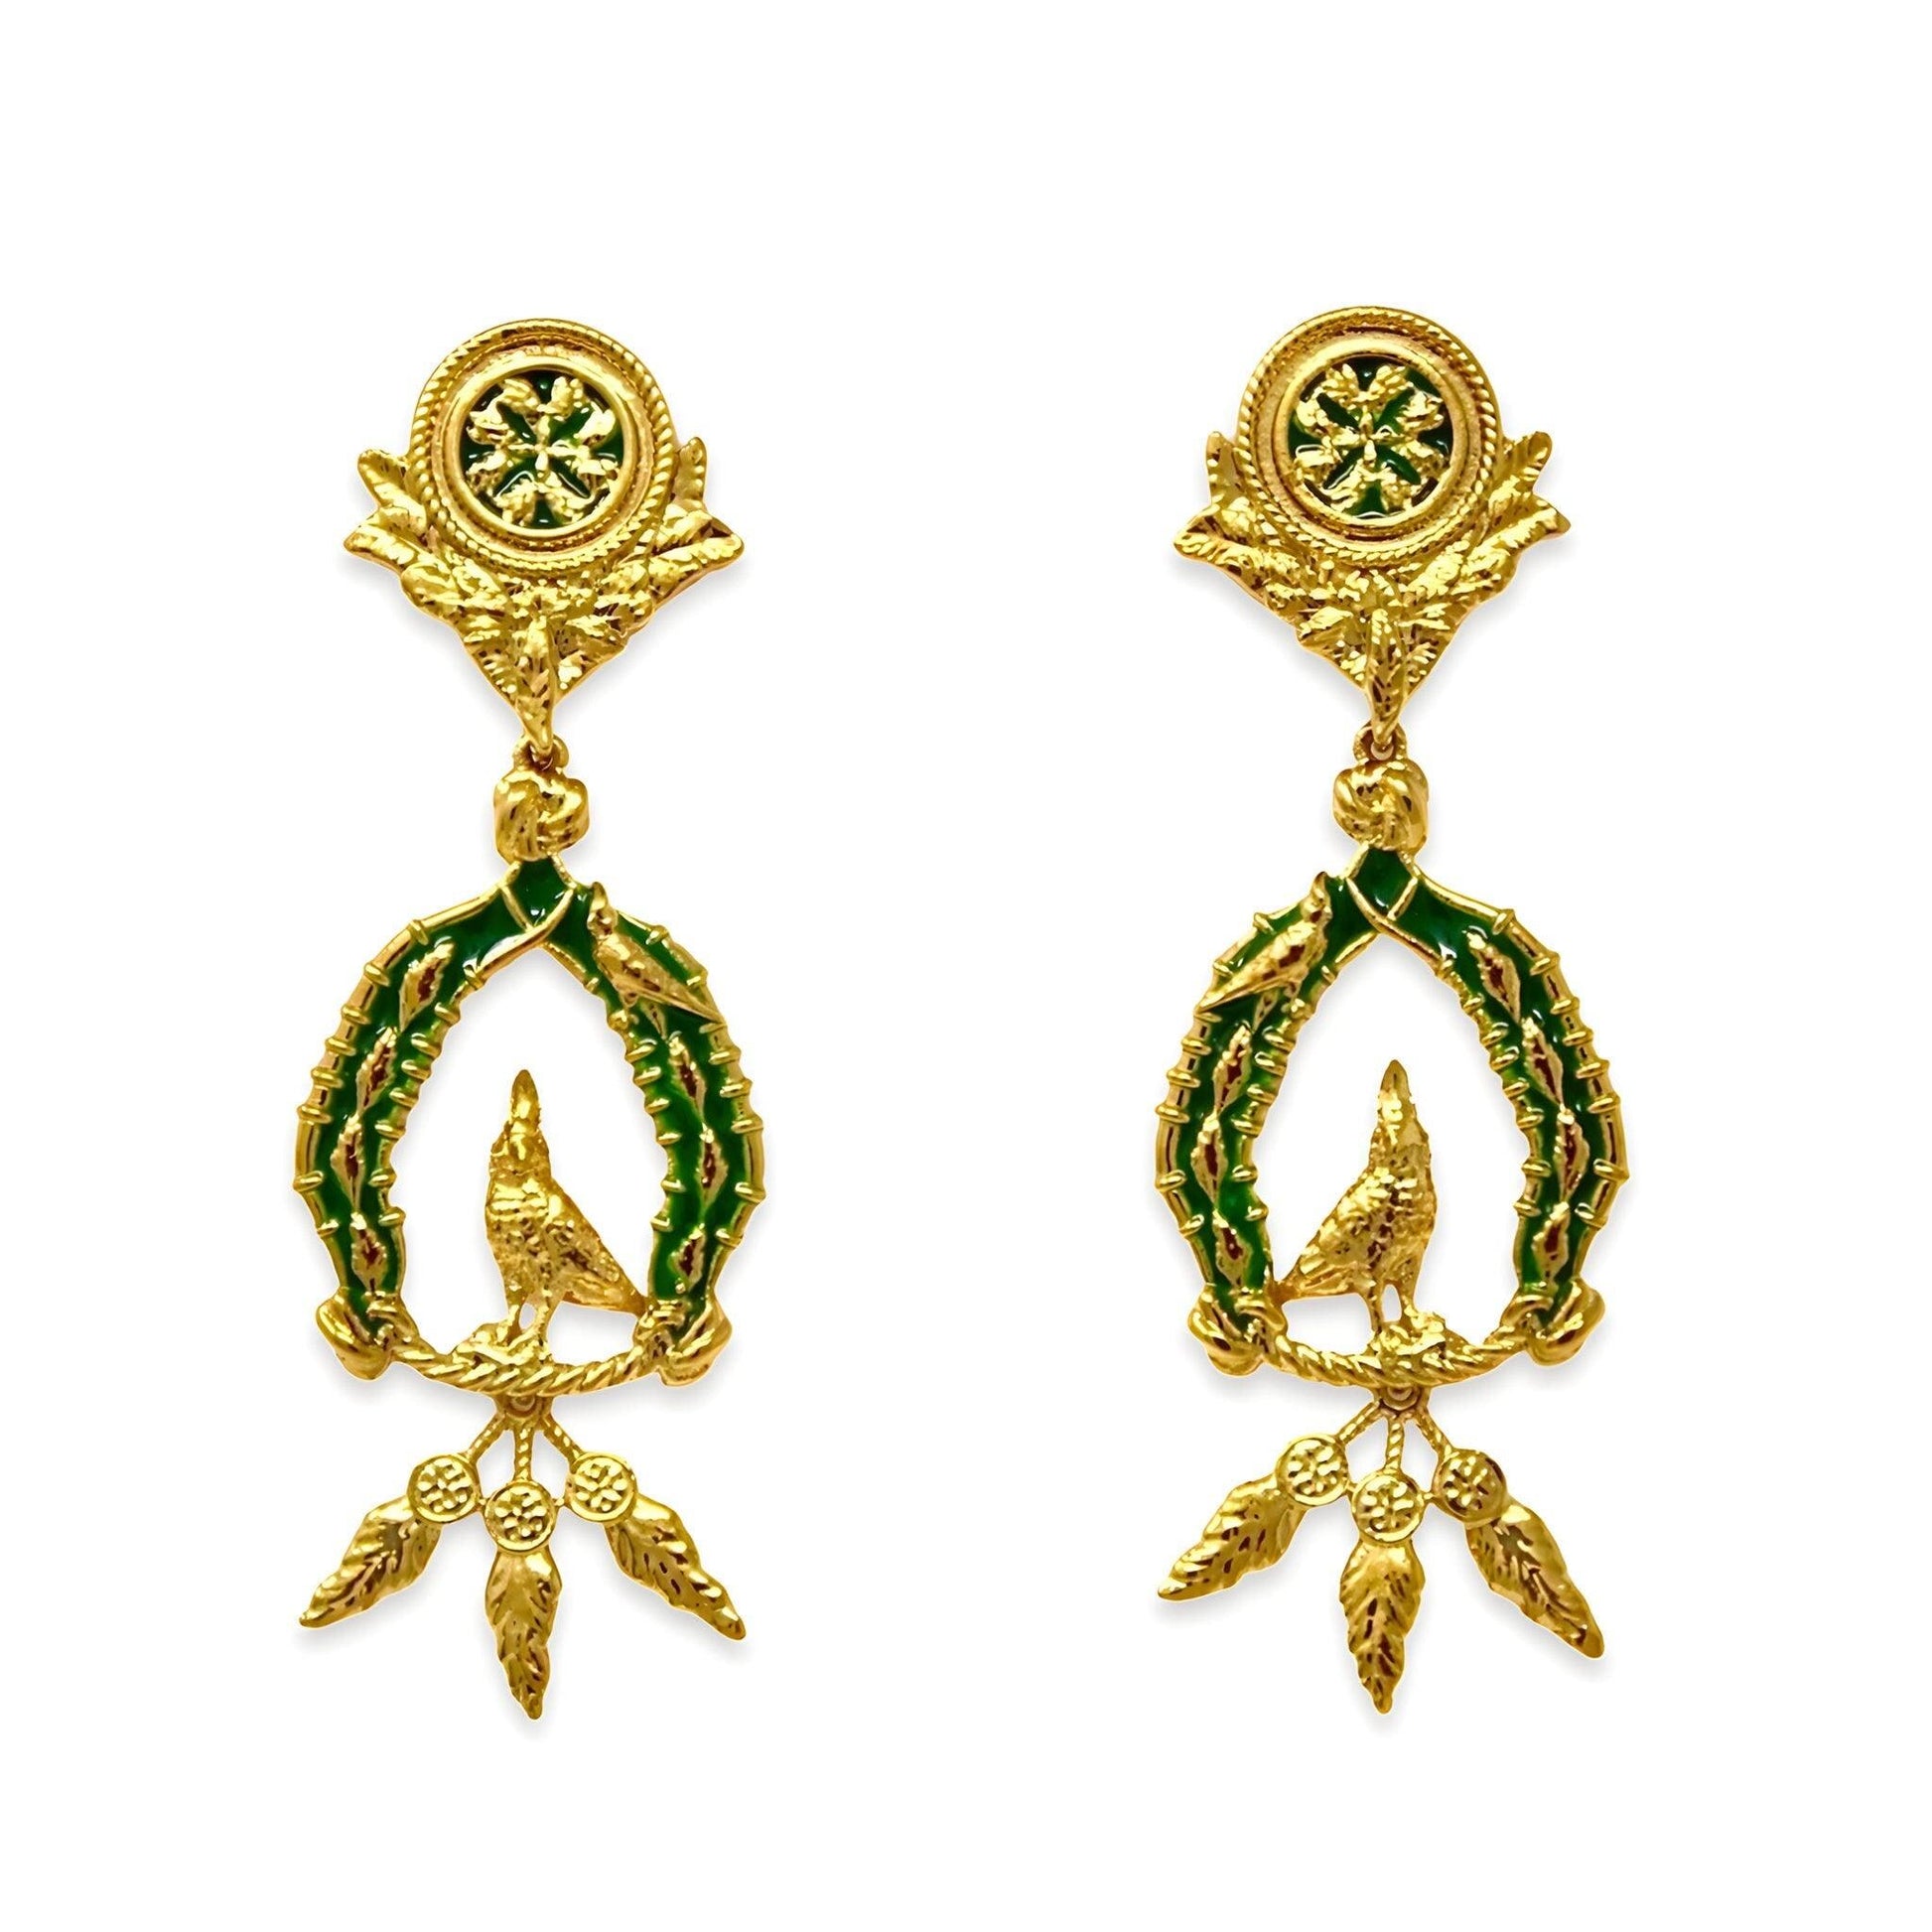 Unique Earrings "Vigor" with Feathers - Gold & Green Jewelry, Gift, Gift for Mom, Artistic